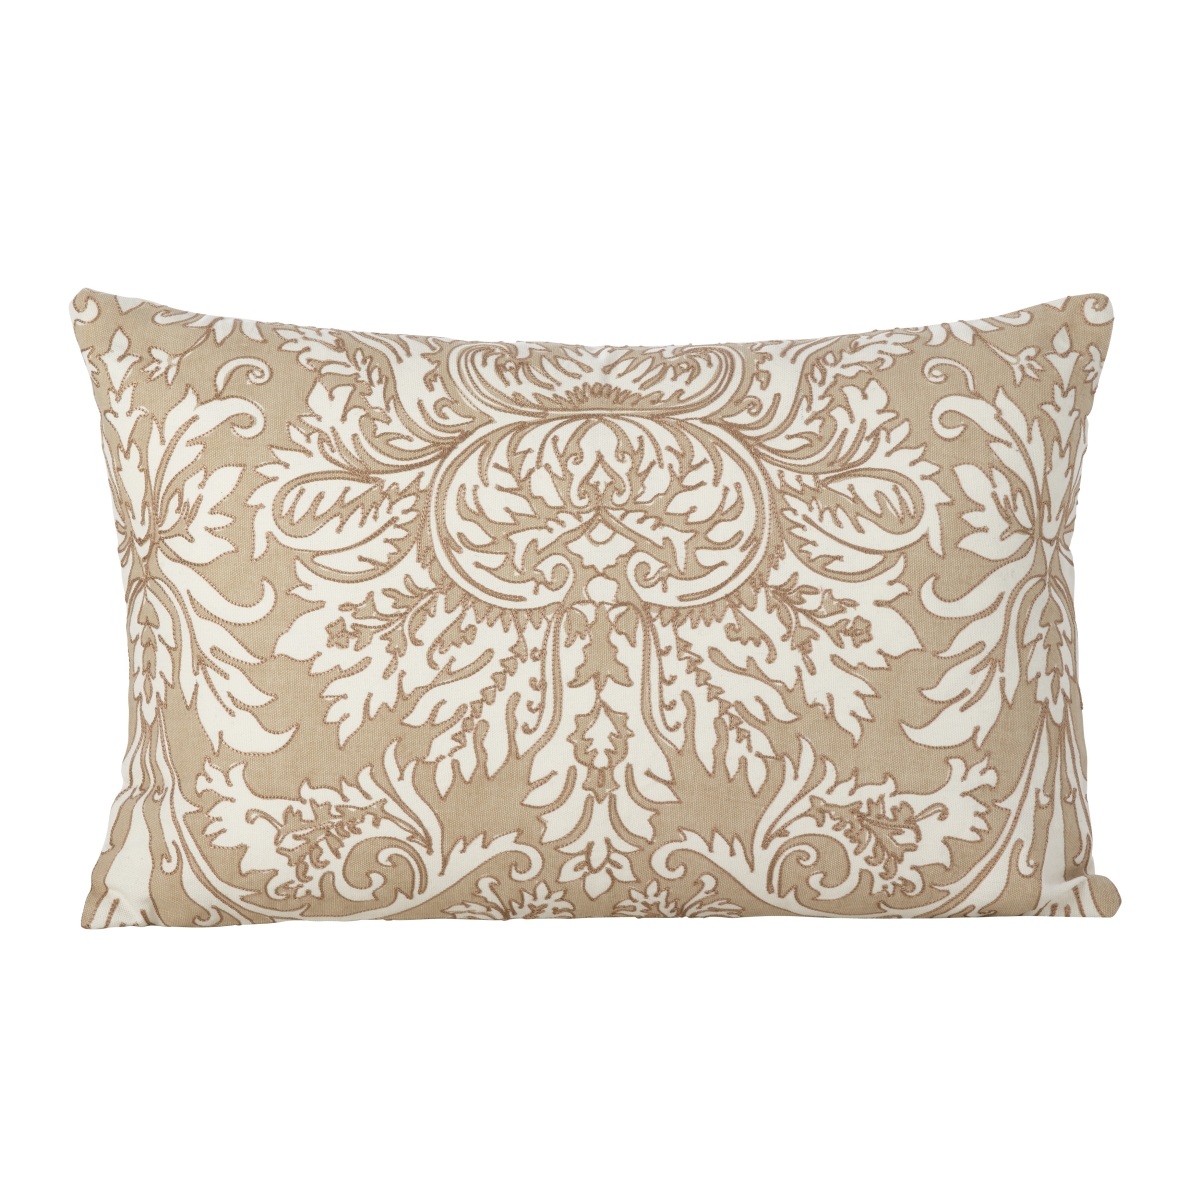 0005.gy1220b 12 X 20 In. Stitched Medallion Motif Cotton Down Filled Throw Pillow, Grey